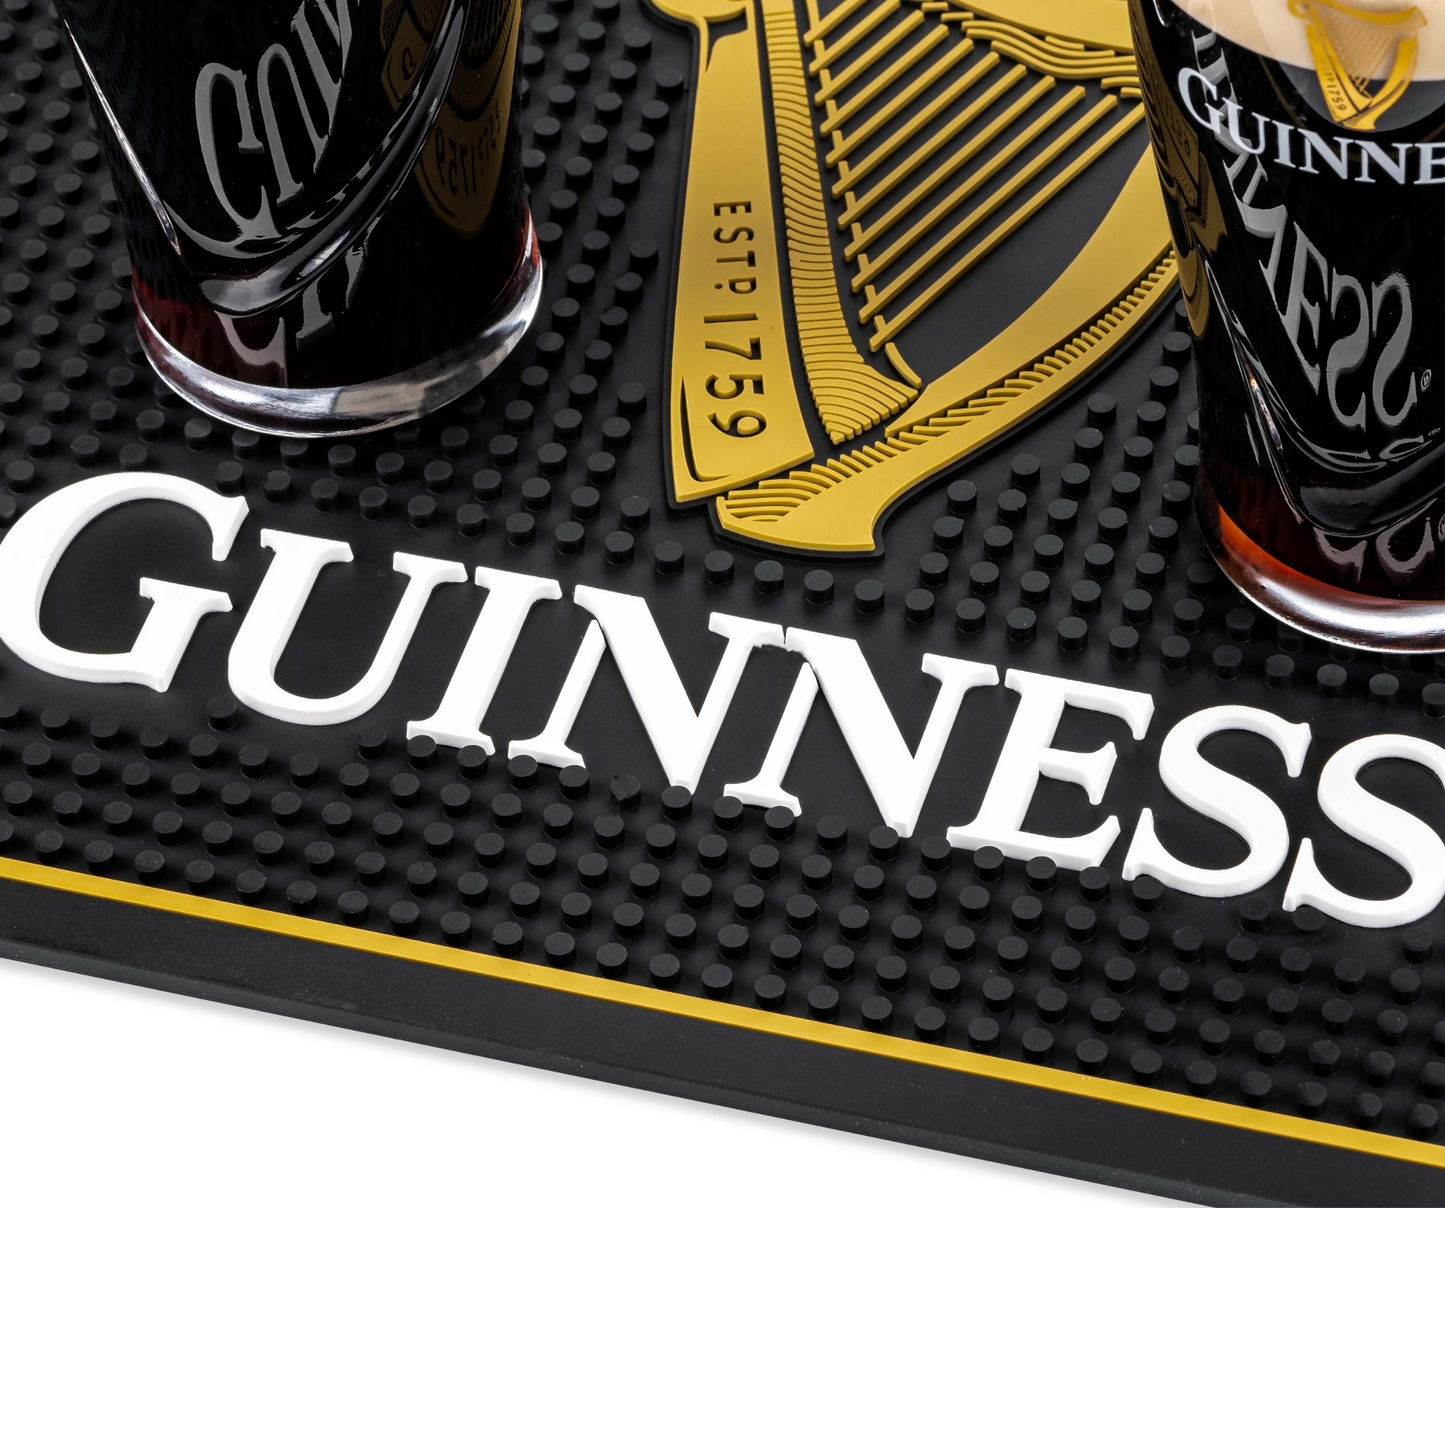 Guinness Bar and Spill Mat for Countertops | Irish Rubber Bar Mat for Drips with Guinness Harp Logo | Professional Bar Service Mat with Guinness Beer, 18 x 12” Compatible